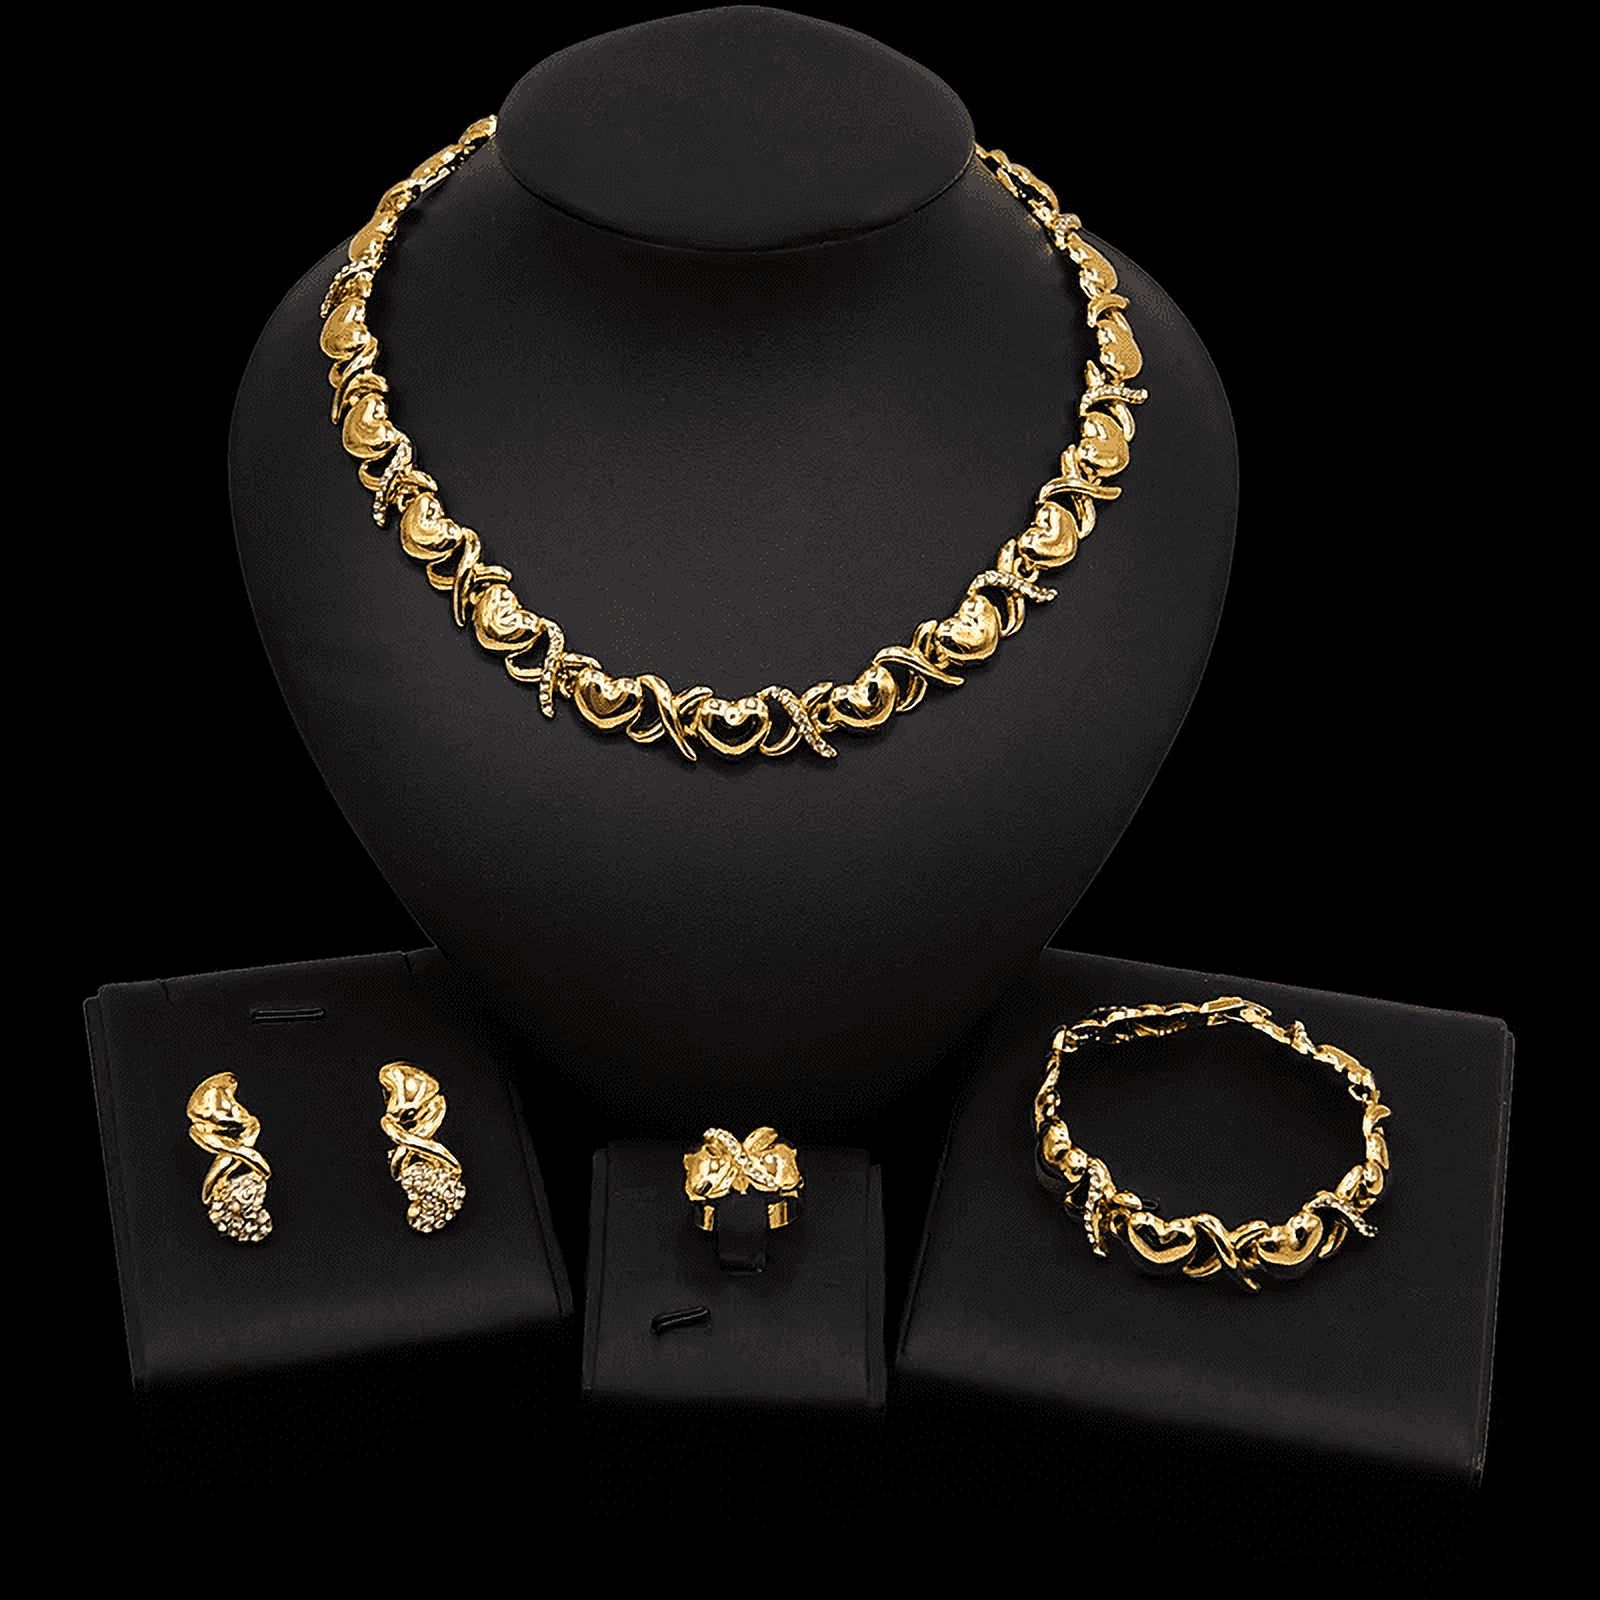 Women's Girls Hugs & Kisses Xoxo Jewelry Set Real Gold Plated Includes Necklace Bracelet Earring and Ring #76, Size: Ring 8. Necklace 18.5 Bracelet